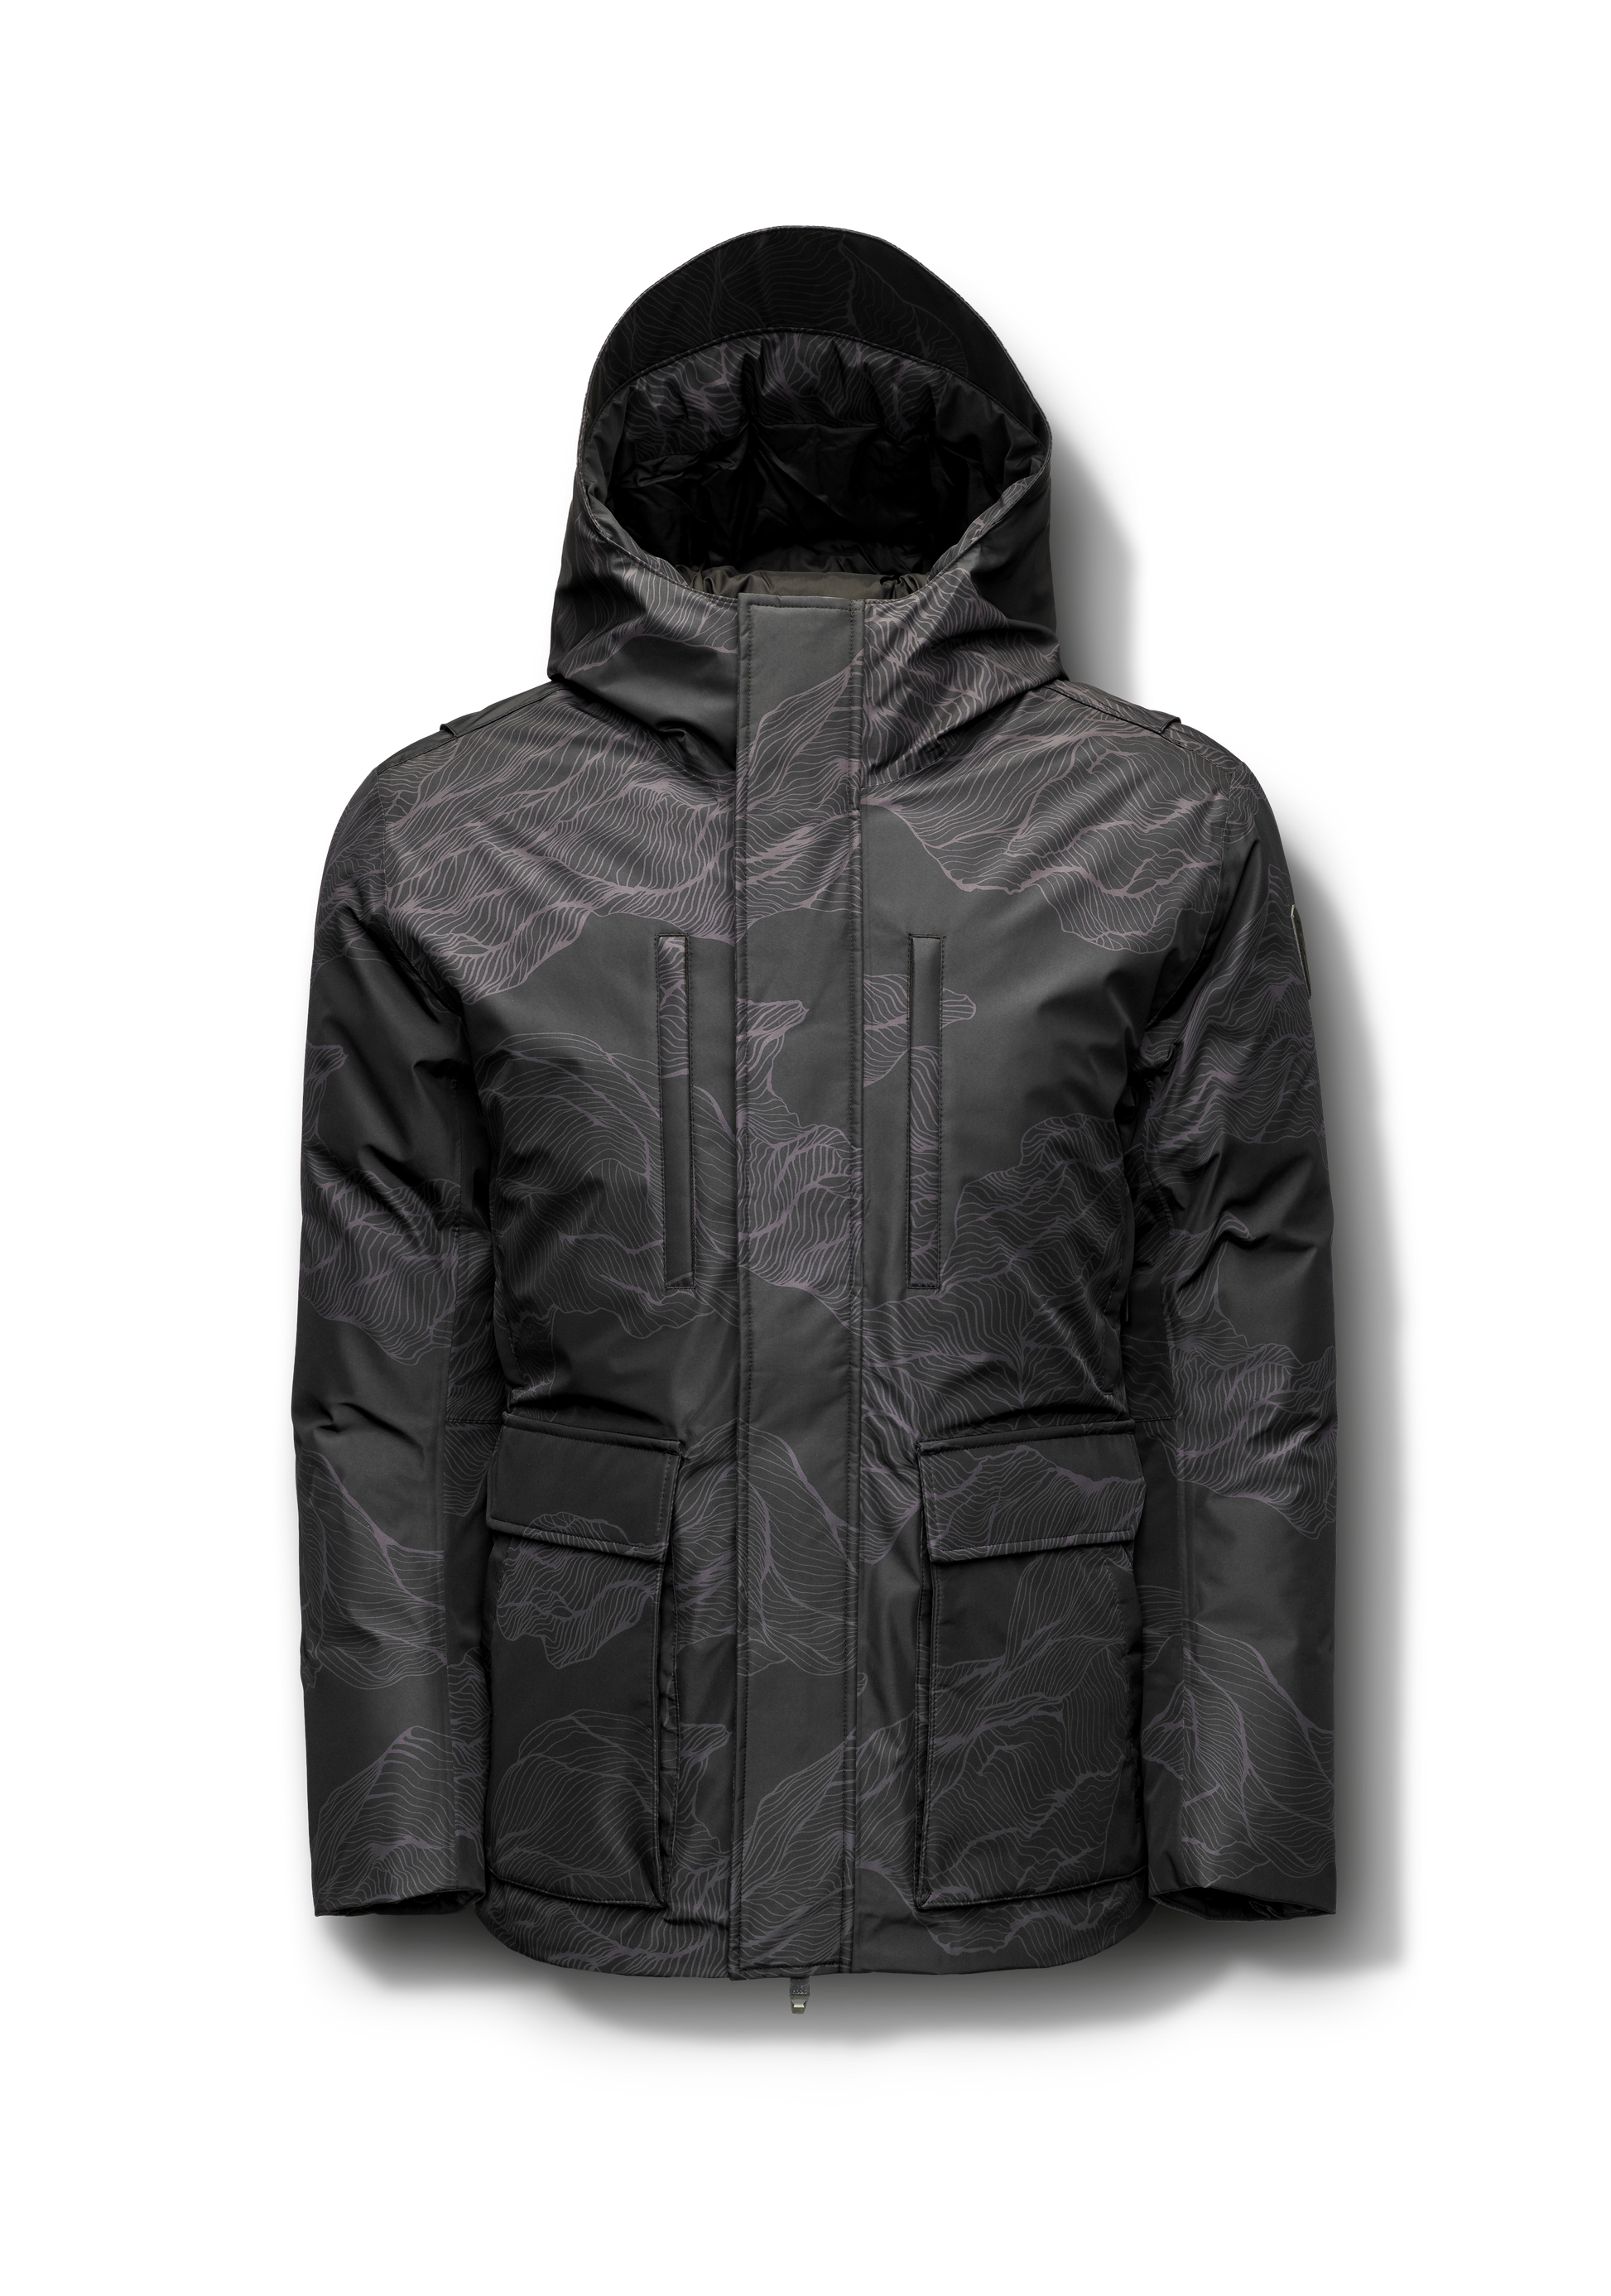 Geo Men's Short Parka in hip length, Canadian duck down insulation, non-removable hood, and two-way zipper, in Dark Desert